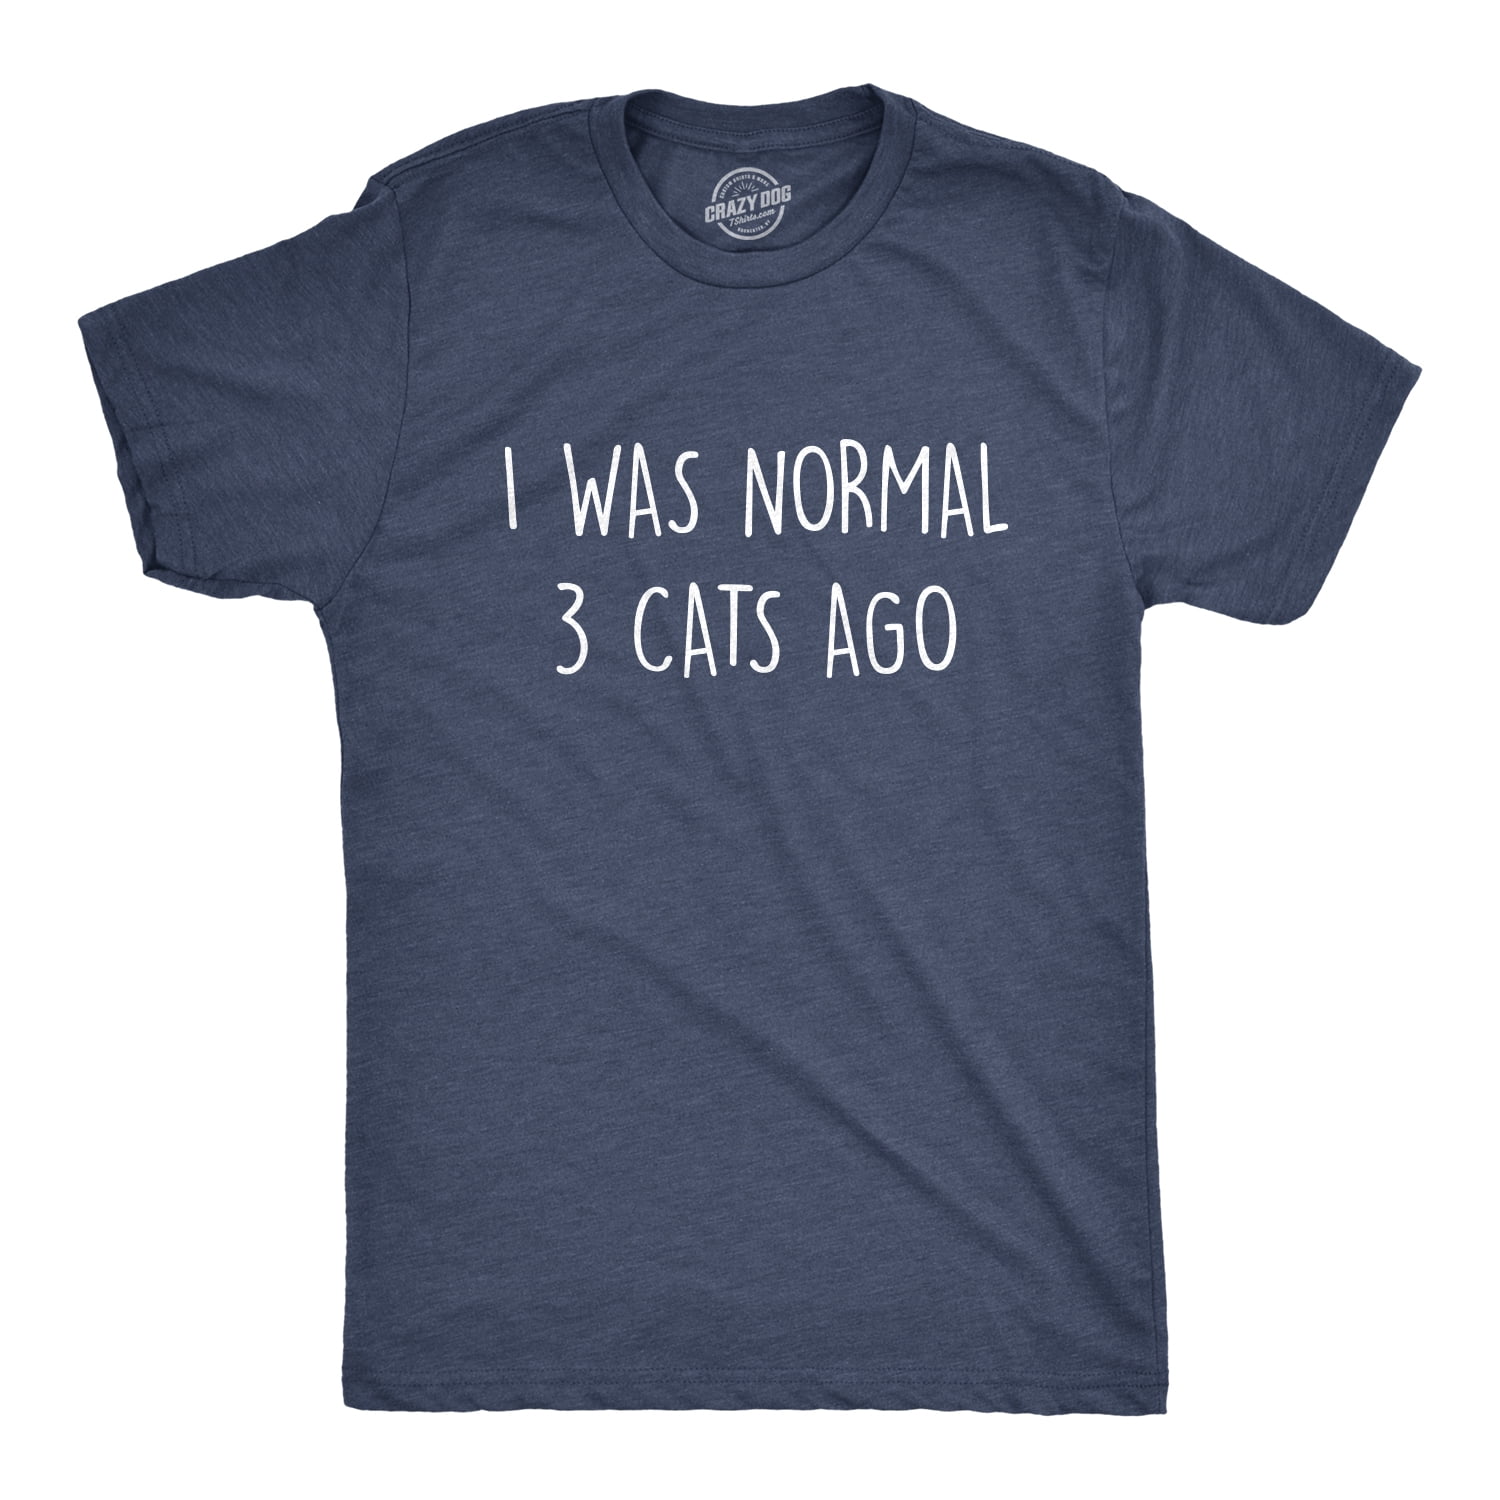 Mens I Was Normal 3 Cats Ago Tshirt Funny Crazy Kitty Lover Tee